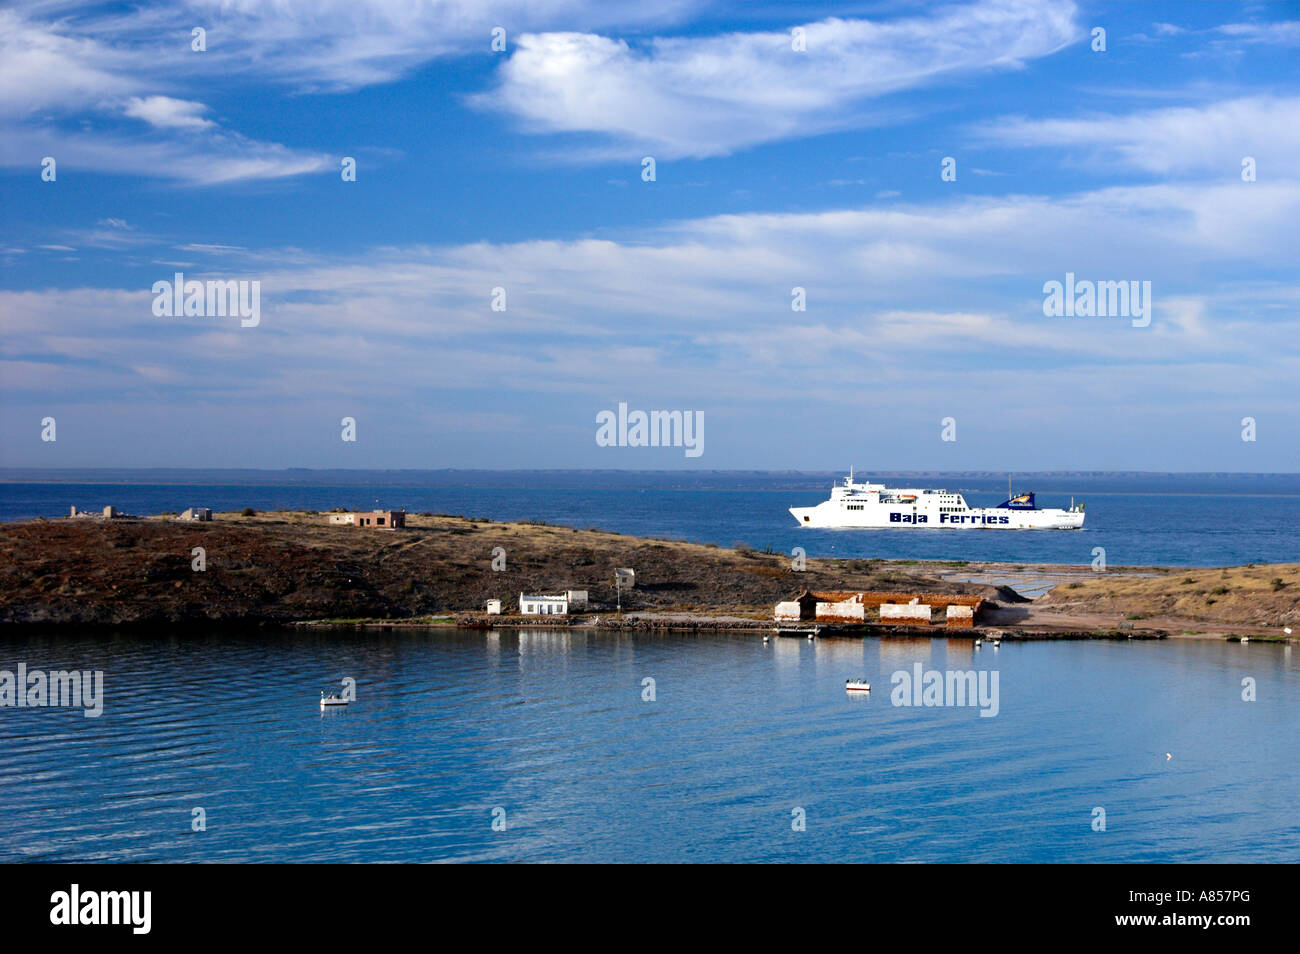 A Mexican ferry boat enteing the port facilities at Pichilingue near La Paz Mexico Stock Photo